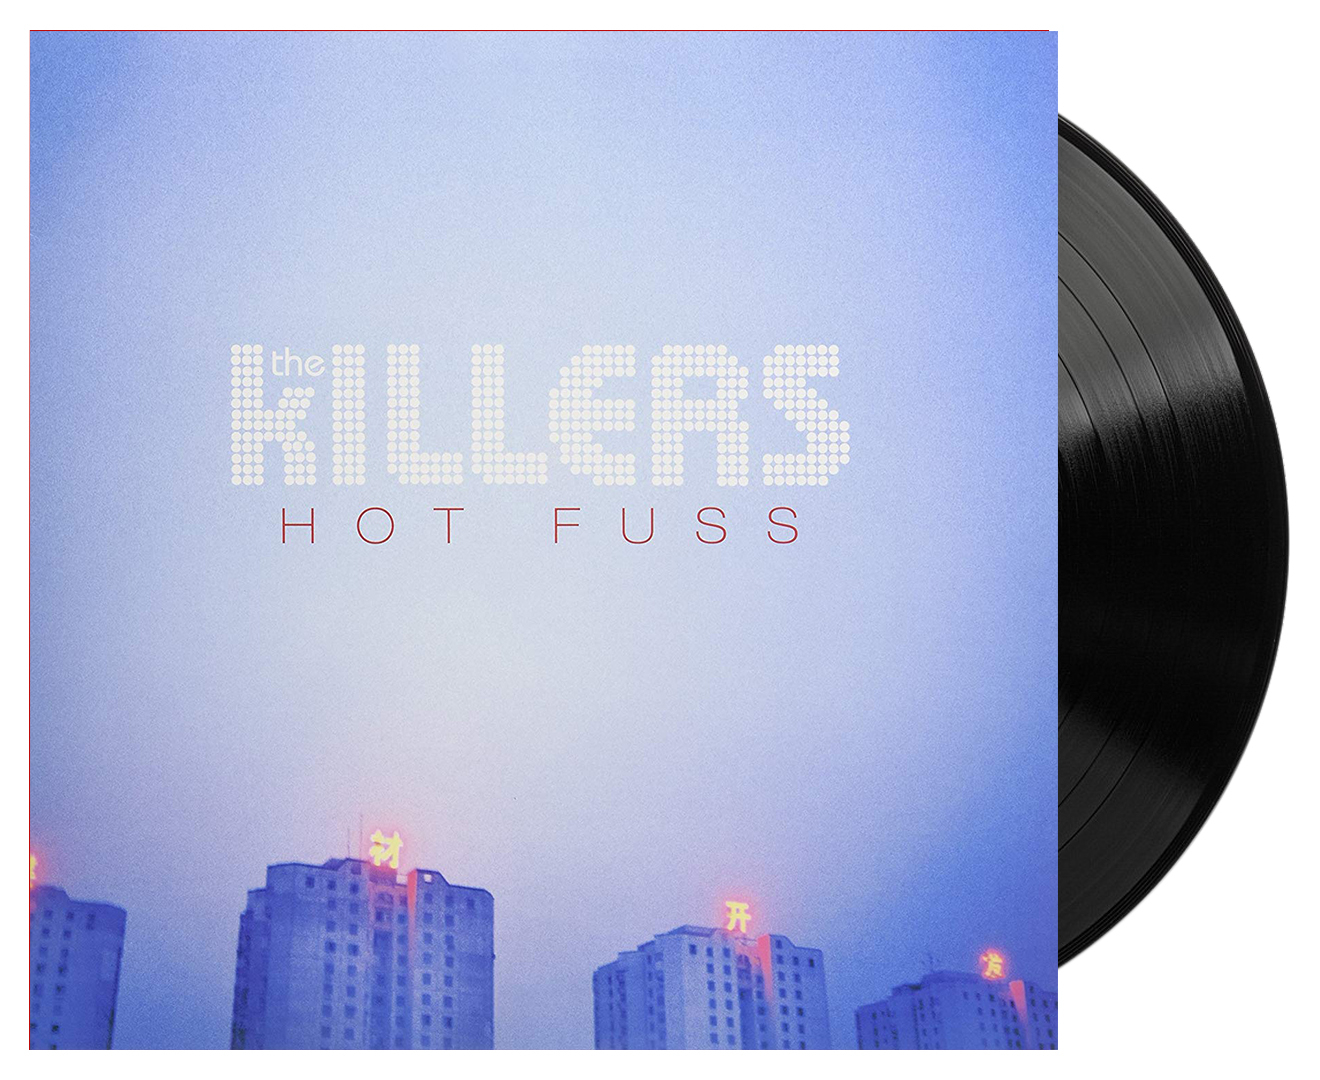 Released in 2004, Hot Fuss is the debut album by American rock band The Kil...